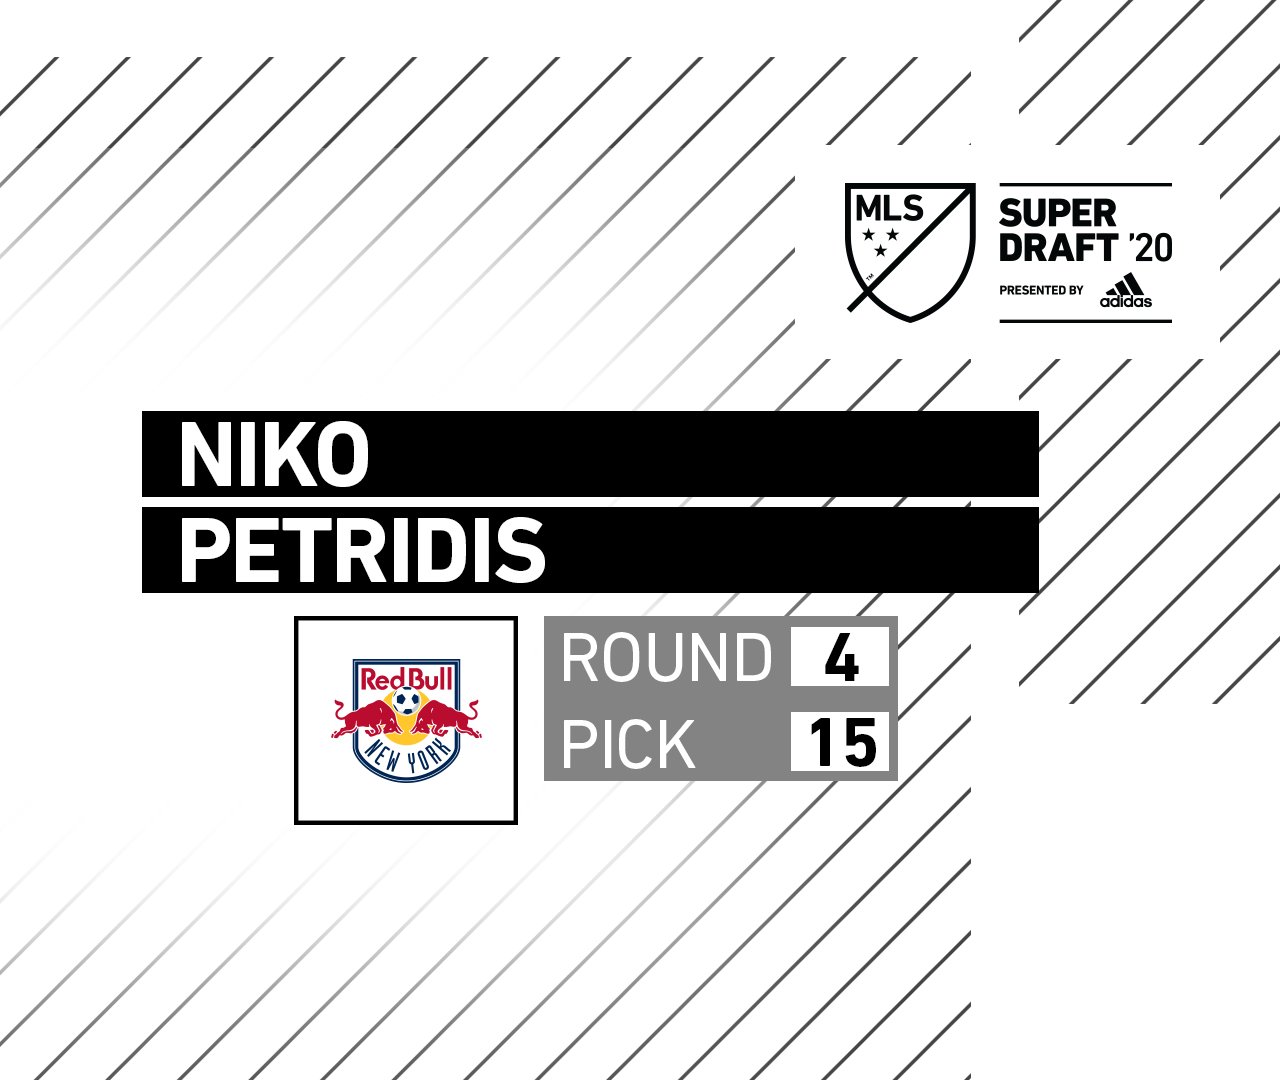 Temprano Amado perfume Niko Petridis on Twitter: "Thank you @NewYorkRedBulls for giving me this  amazing opportunity! Ready to get to work with the team!" / Twitter